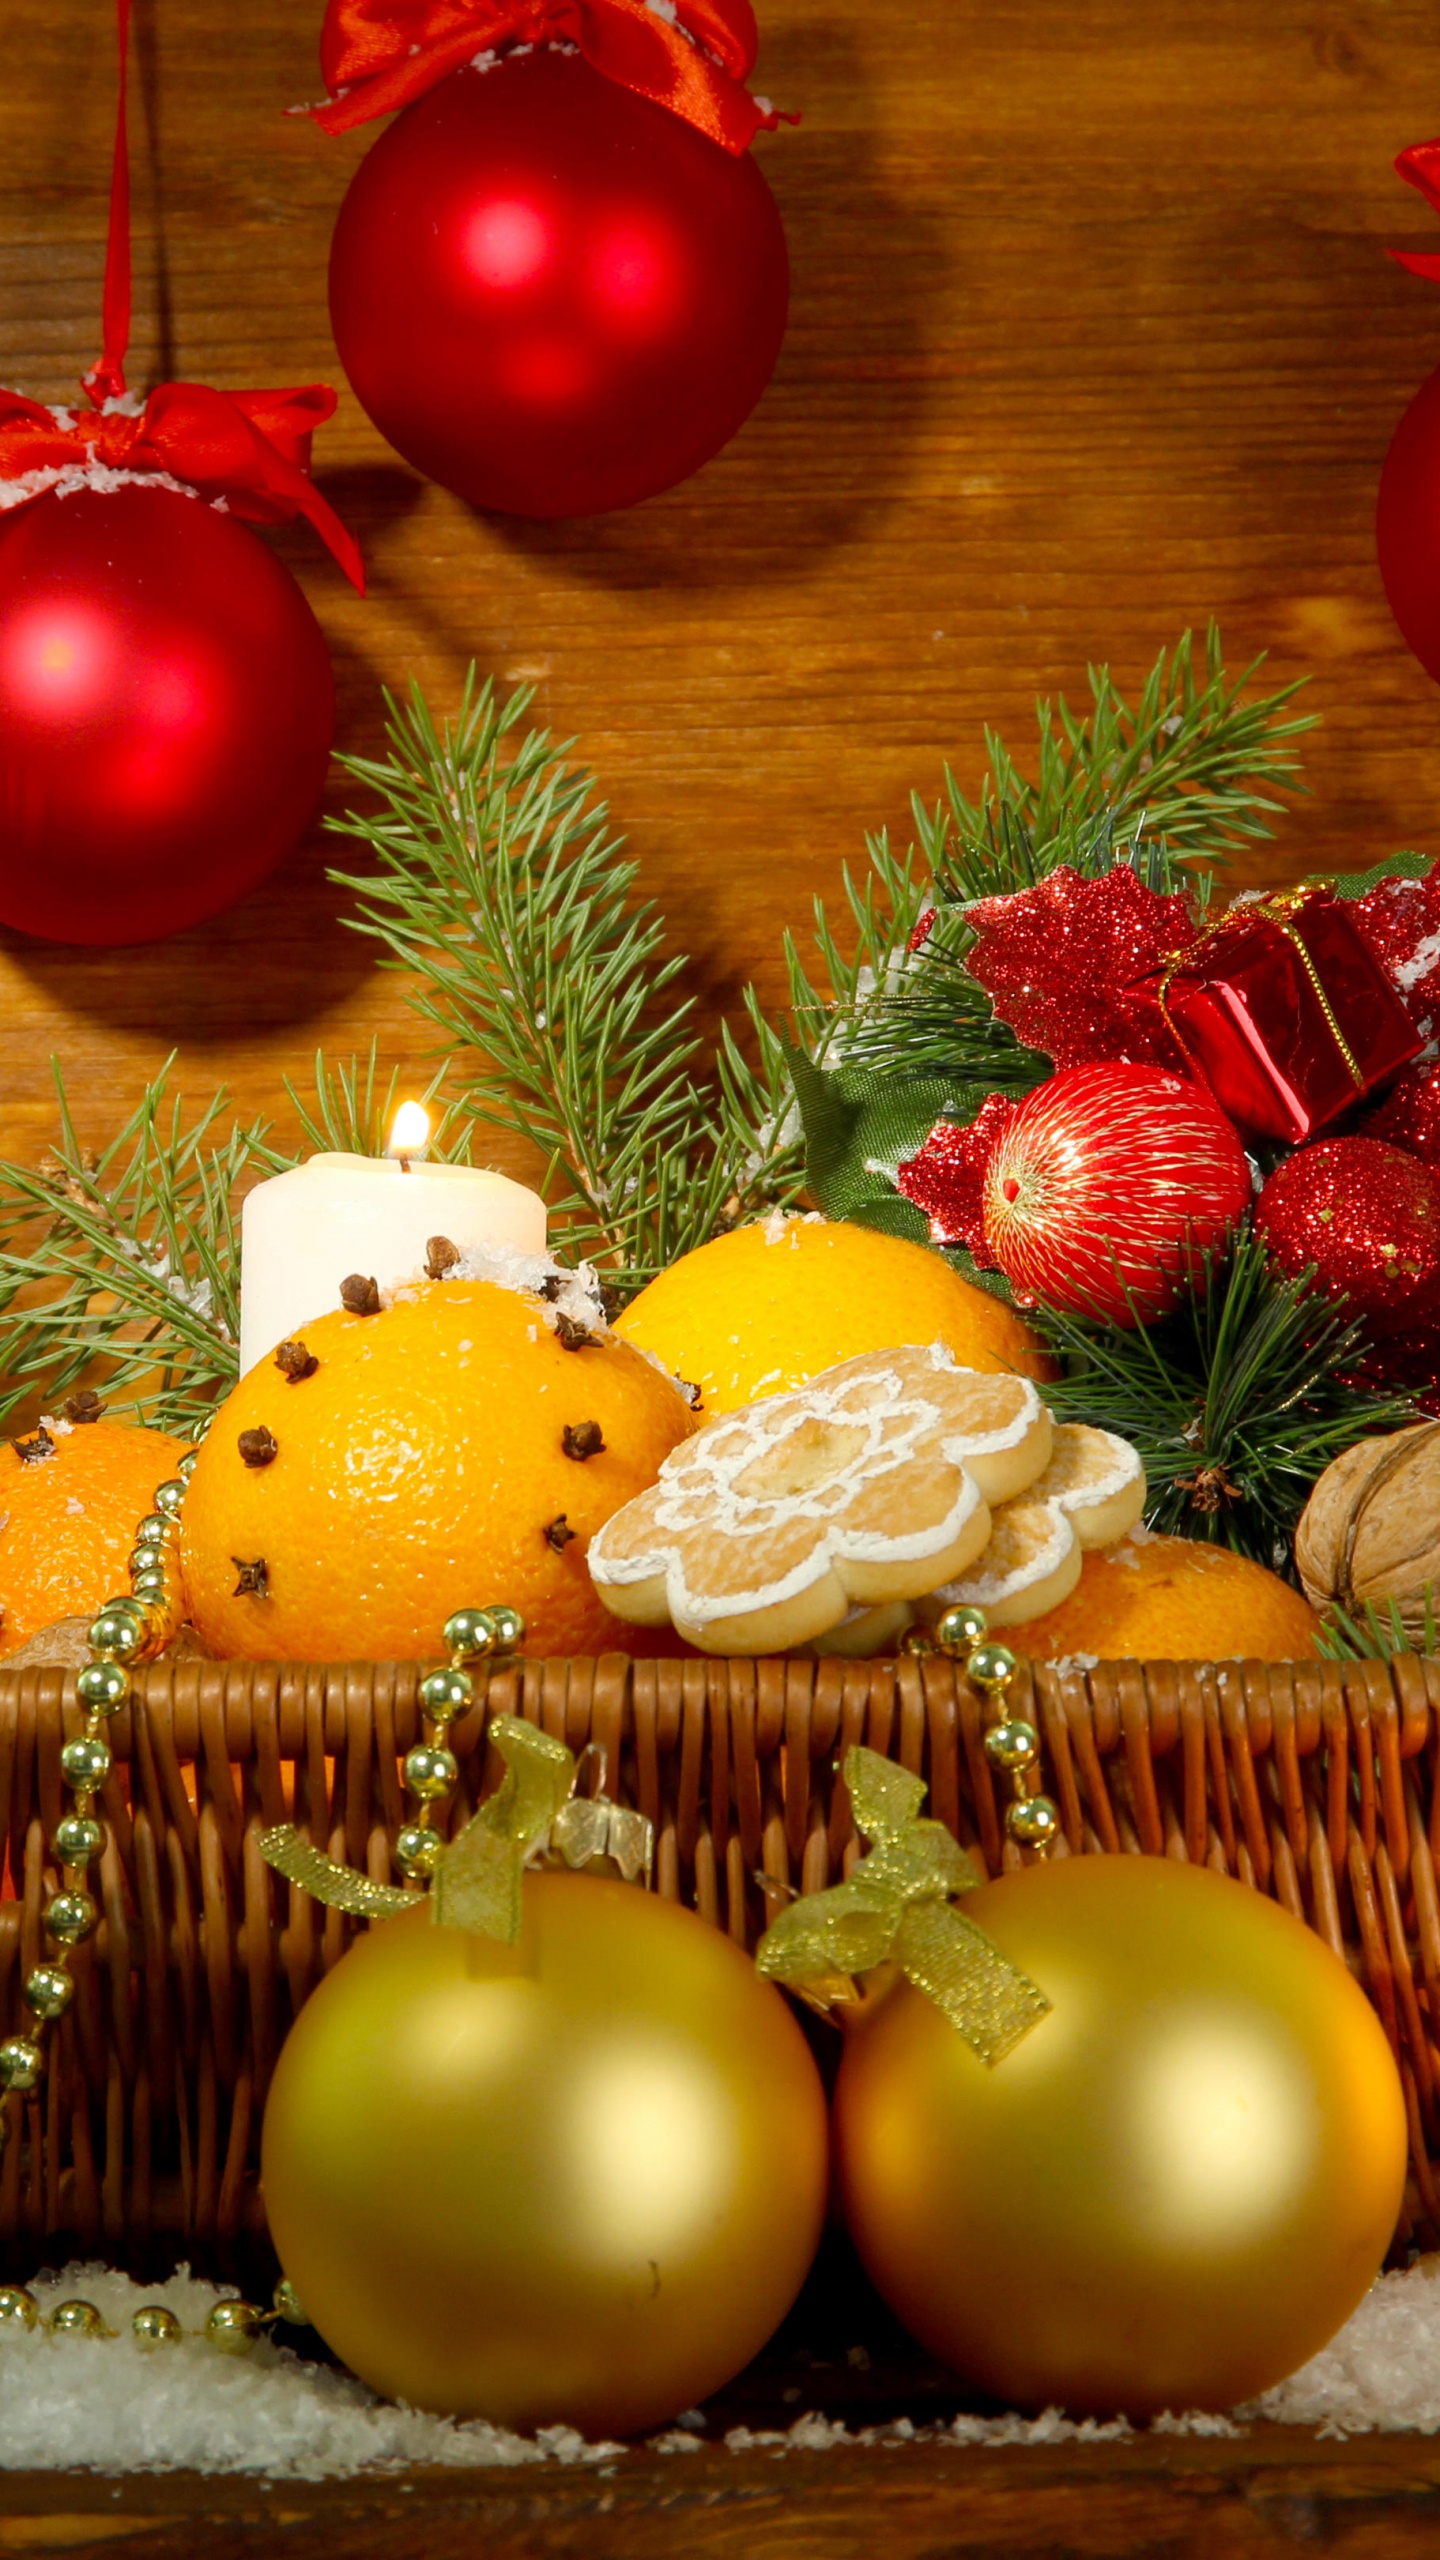 New Year, Christmas Day, Christmas Ornament, Christmas Decoration, Still Life. Wallpaper in 1440x2560 Resolution